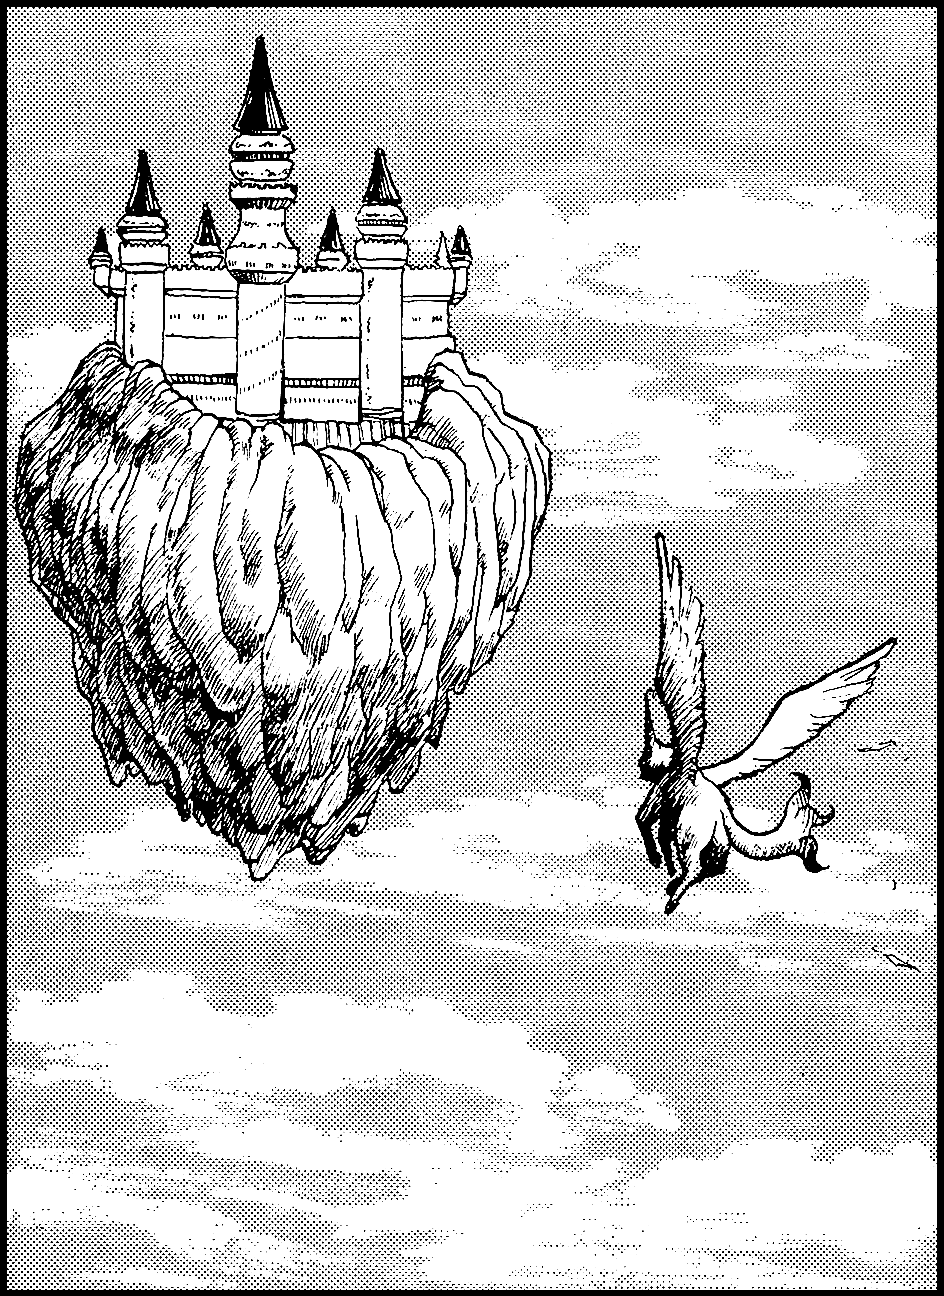 Suddenly, the Air Castle appeared!  In order to defeat the evil demon La Shiec, Alisa and her comrades took flight. 